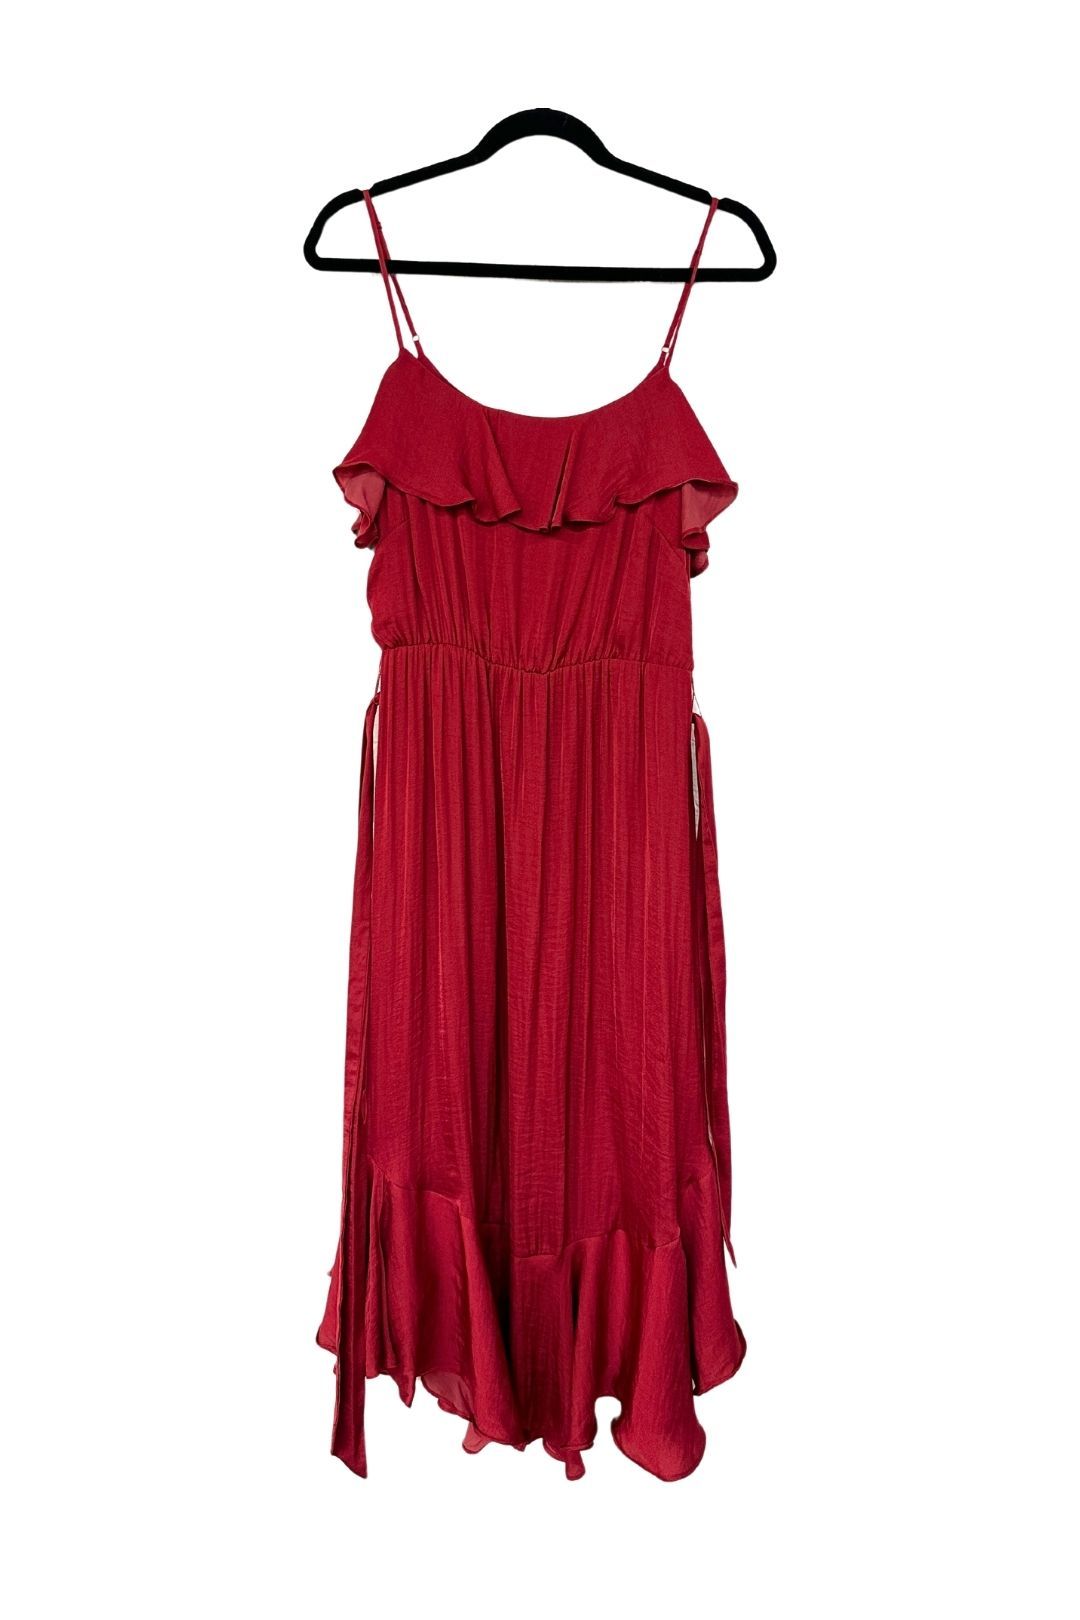 Forever New in Red Ruffle Dress with Waist Tie